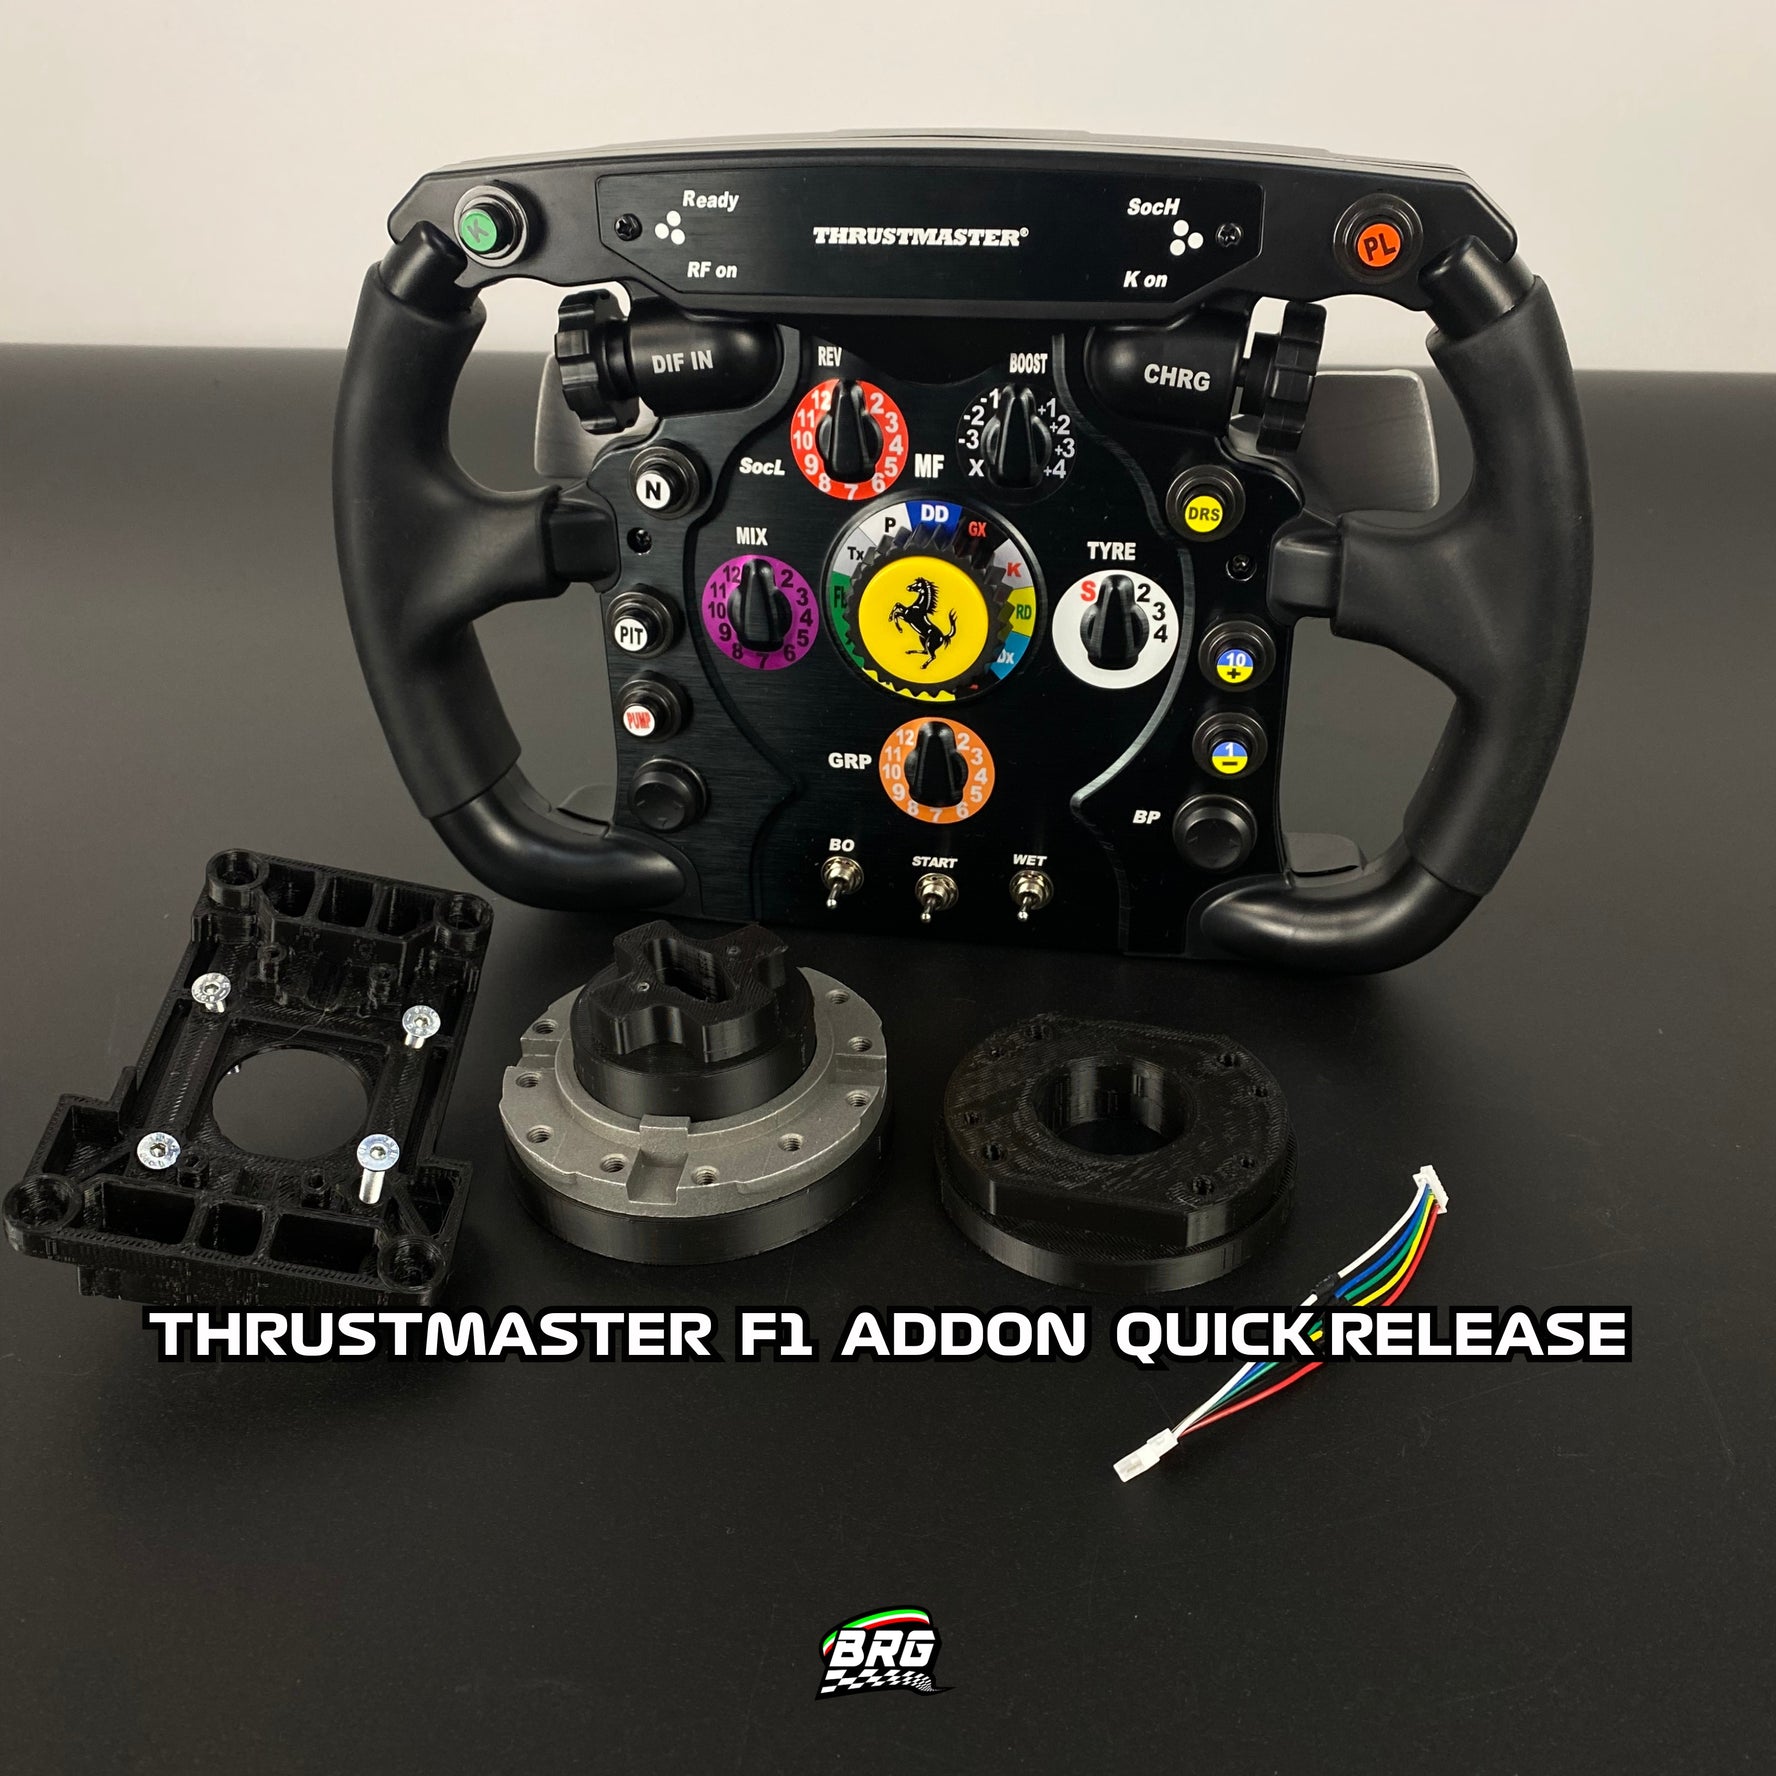 Thrustmaster F1 AddOn Quick Release